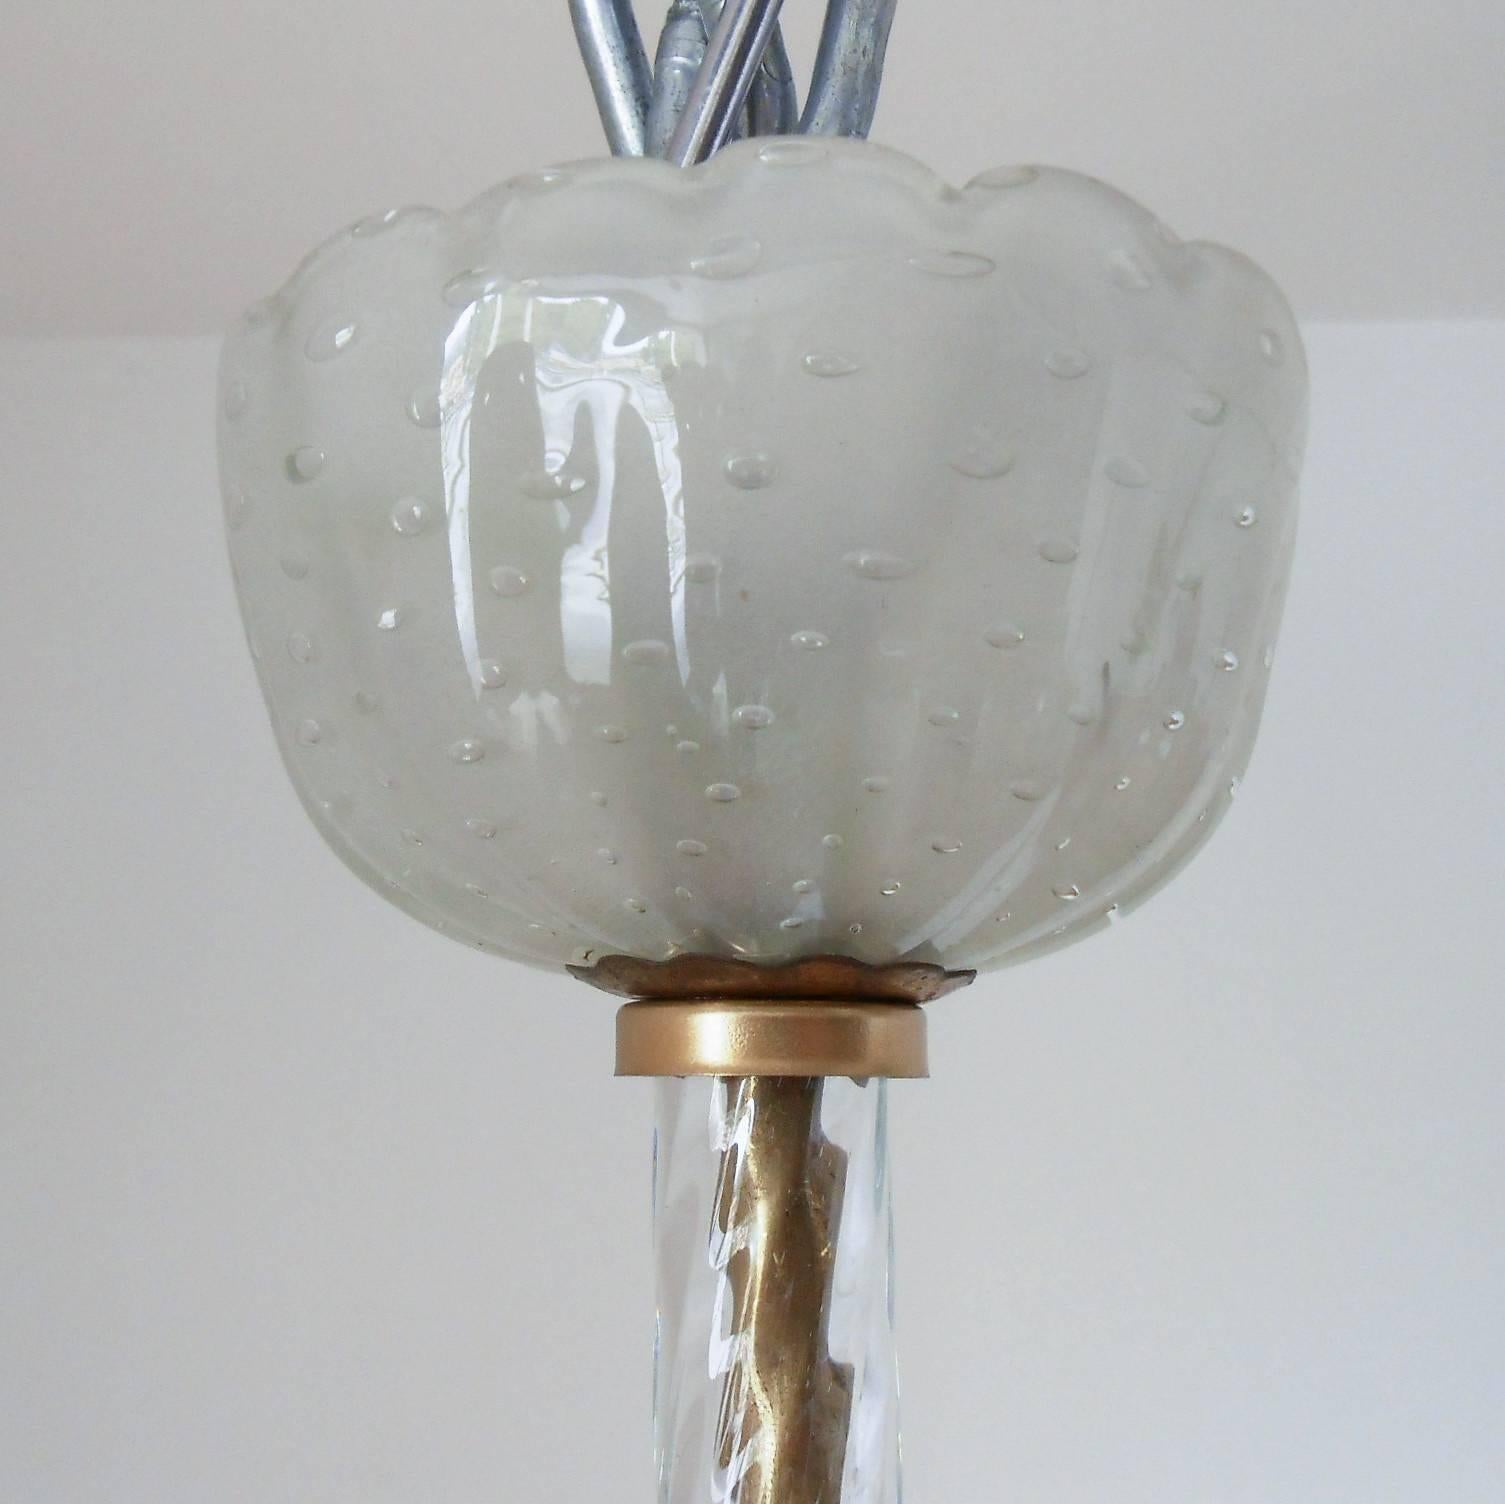 Vintage Italian pendant with clear Murano glass hand blown with bubbles within the glass using Pulegoso technique and brass details,designed by Ercole Barovier circa 1950’s, made in Italy.